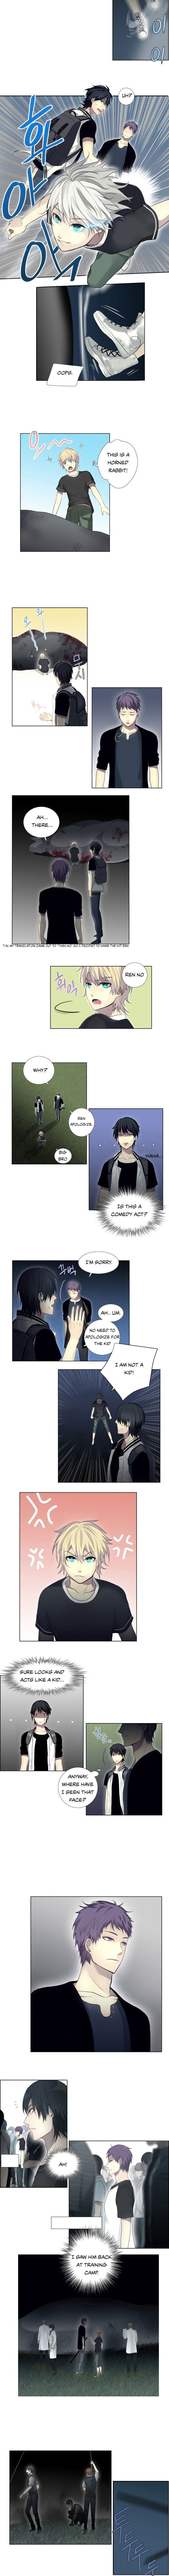 Gong Heon Ja Chapter 7 page 4